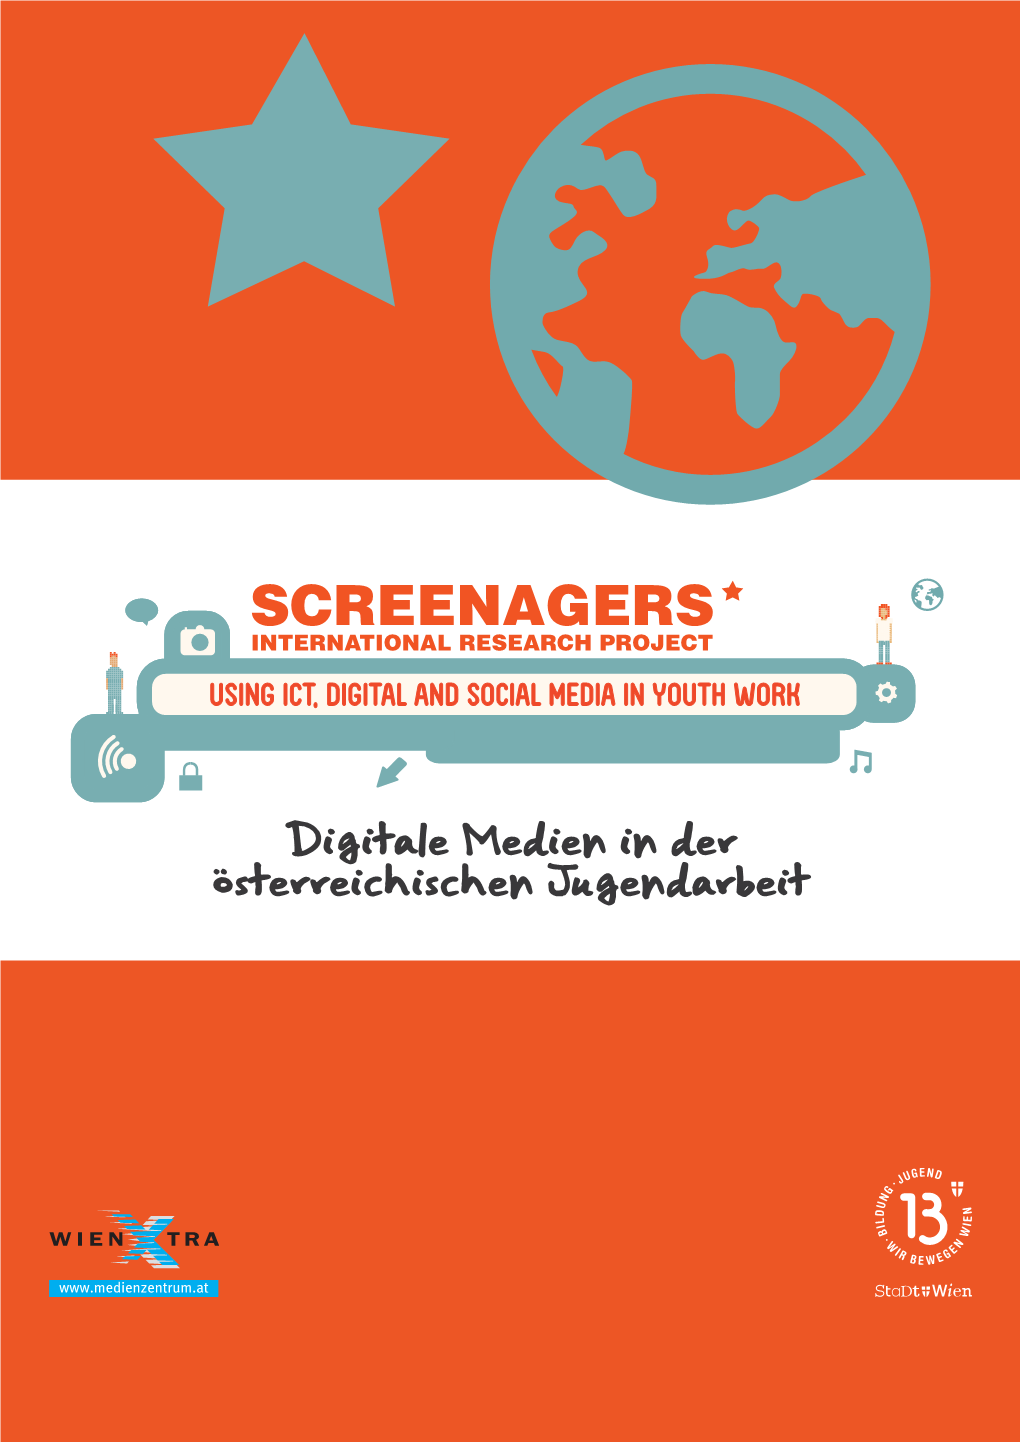 Screenagers International Research Project